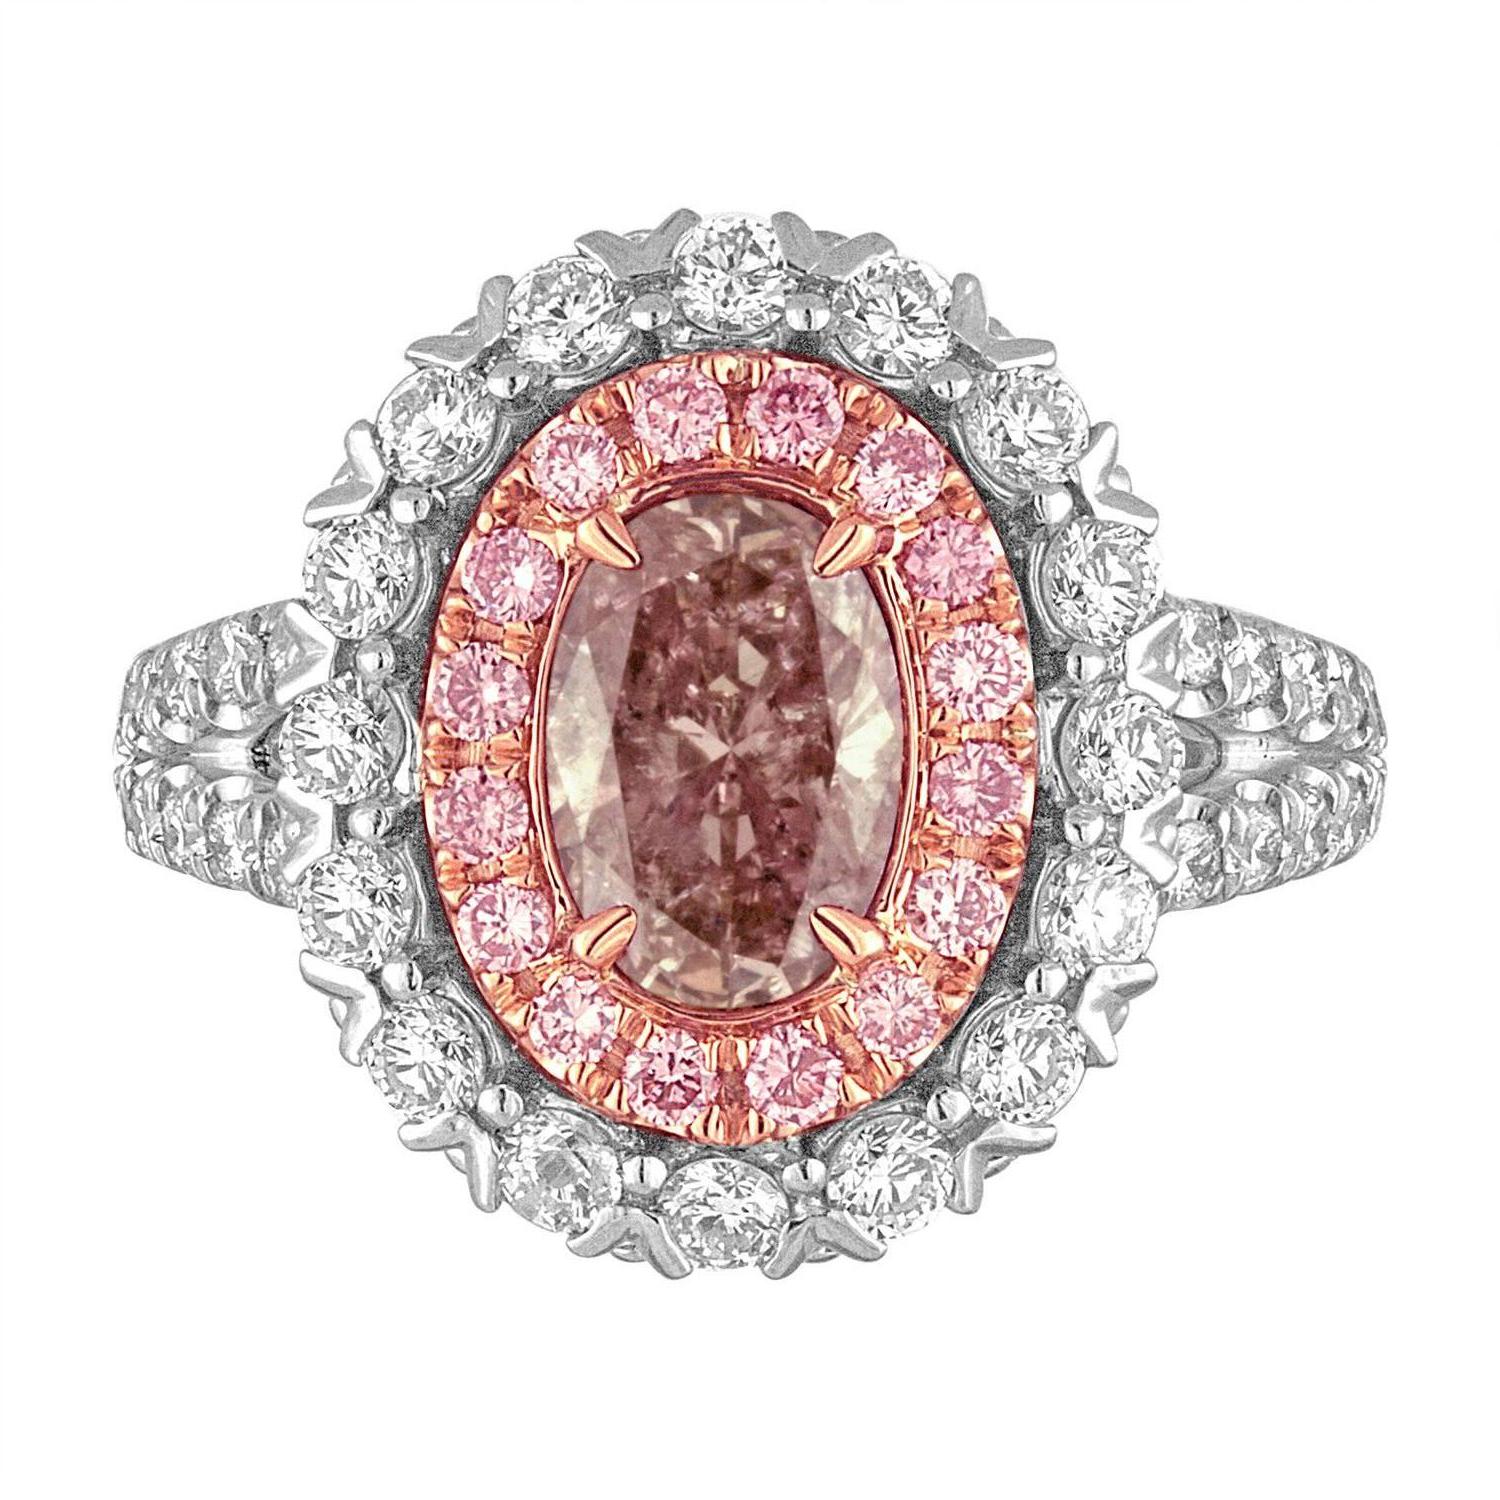 1.10 CT Oval GIA certified to be Fancy Brownish Pink Diamond is set in Platinum  and Rose Gold Mounting.
The 1.10 CT Oval is set in Hand Crafted Mounting and surrounded by one row 16 Brilliants of Pink Diamonds weighing 0.23 Carat Total Weight.